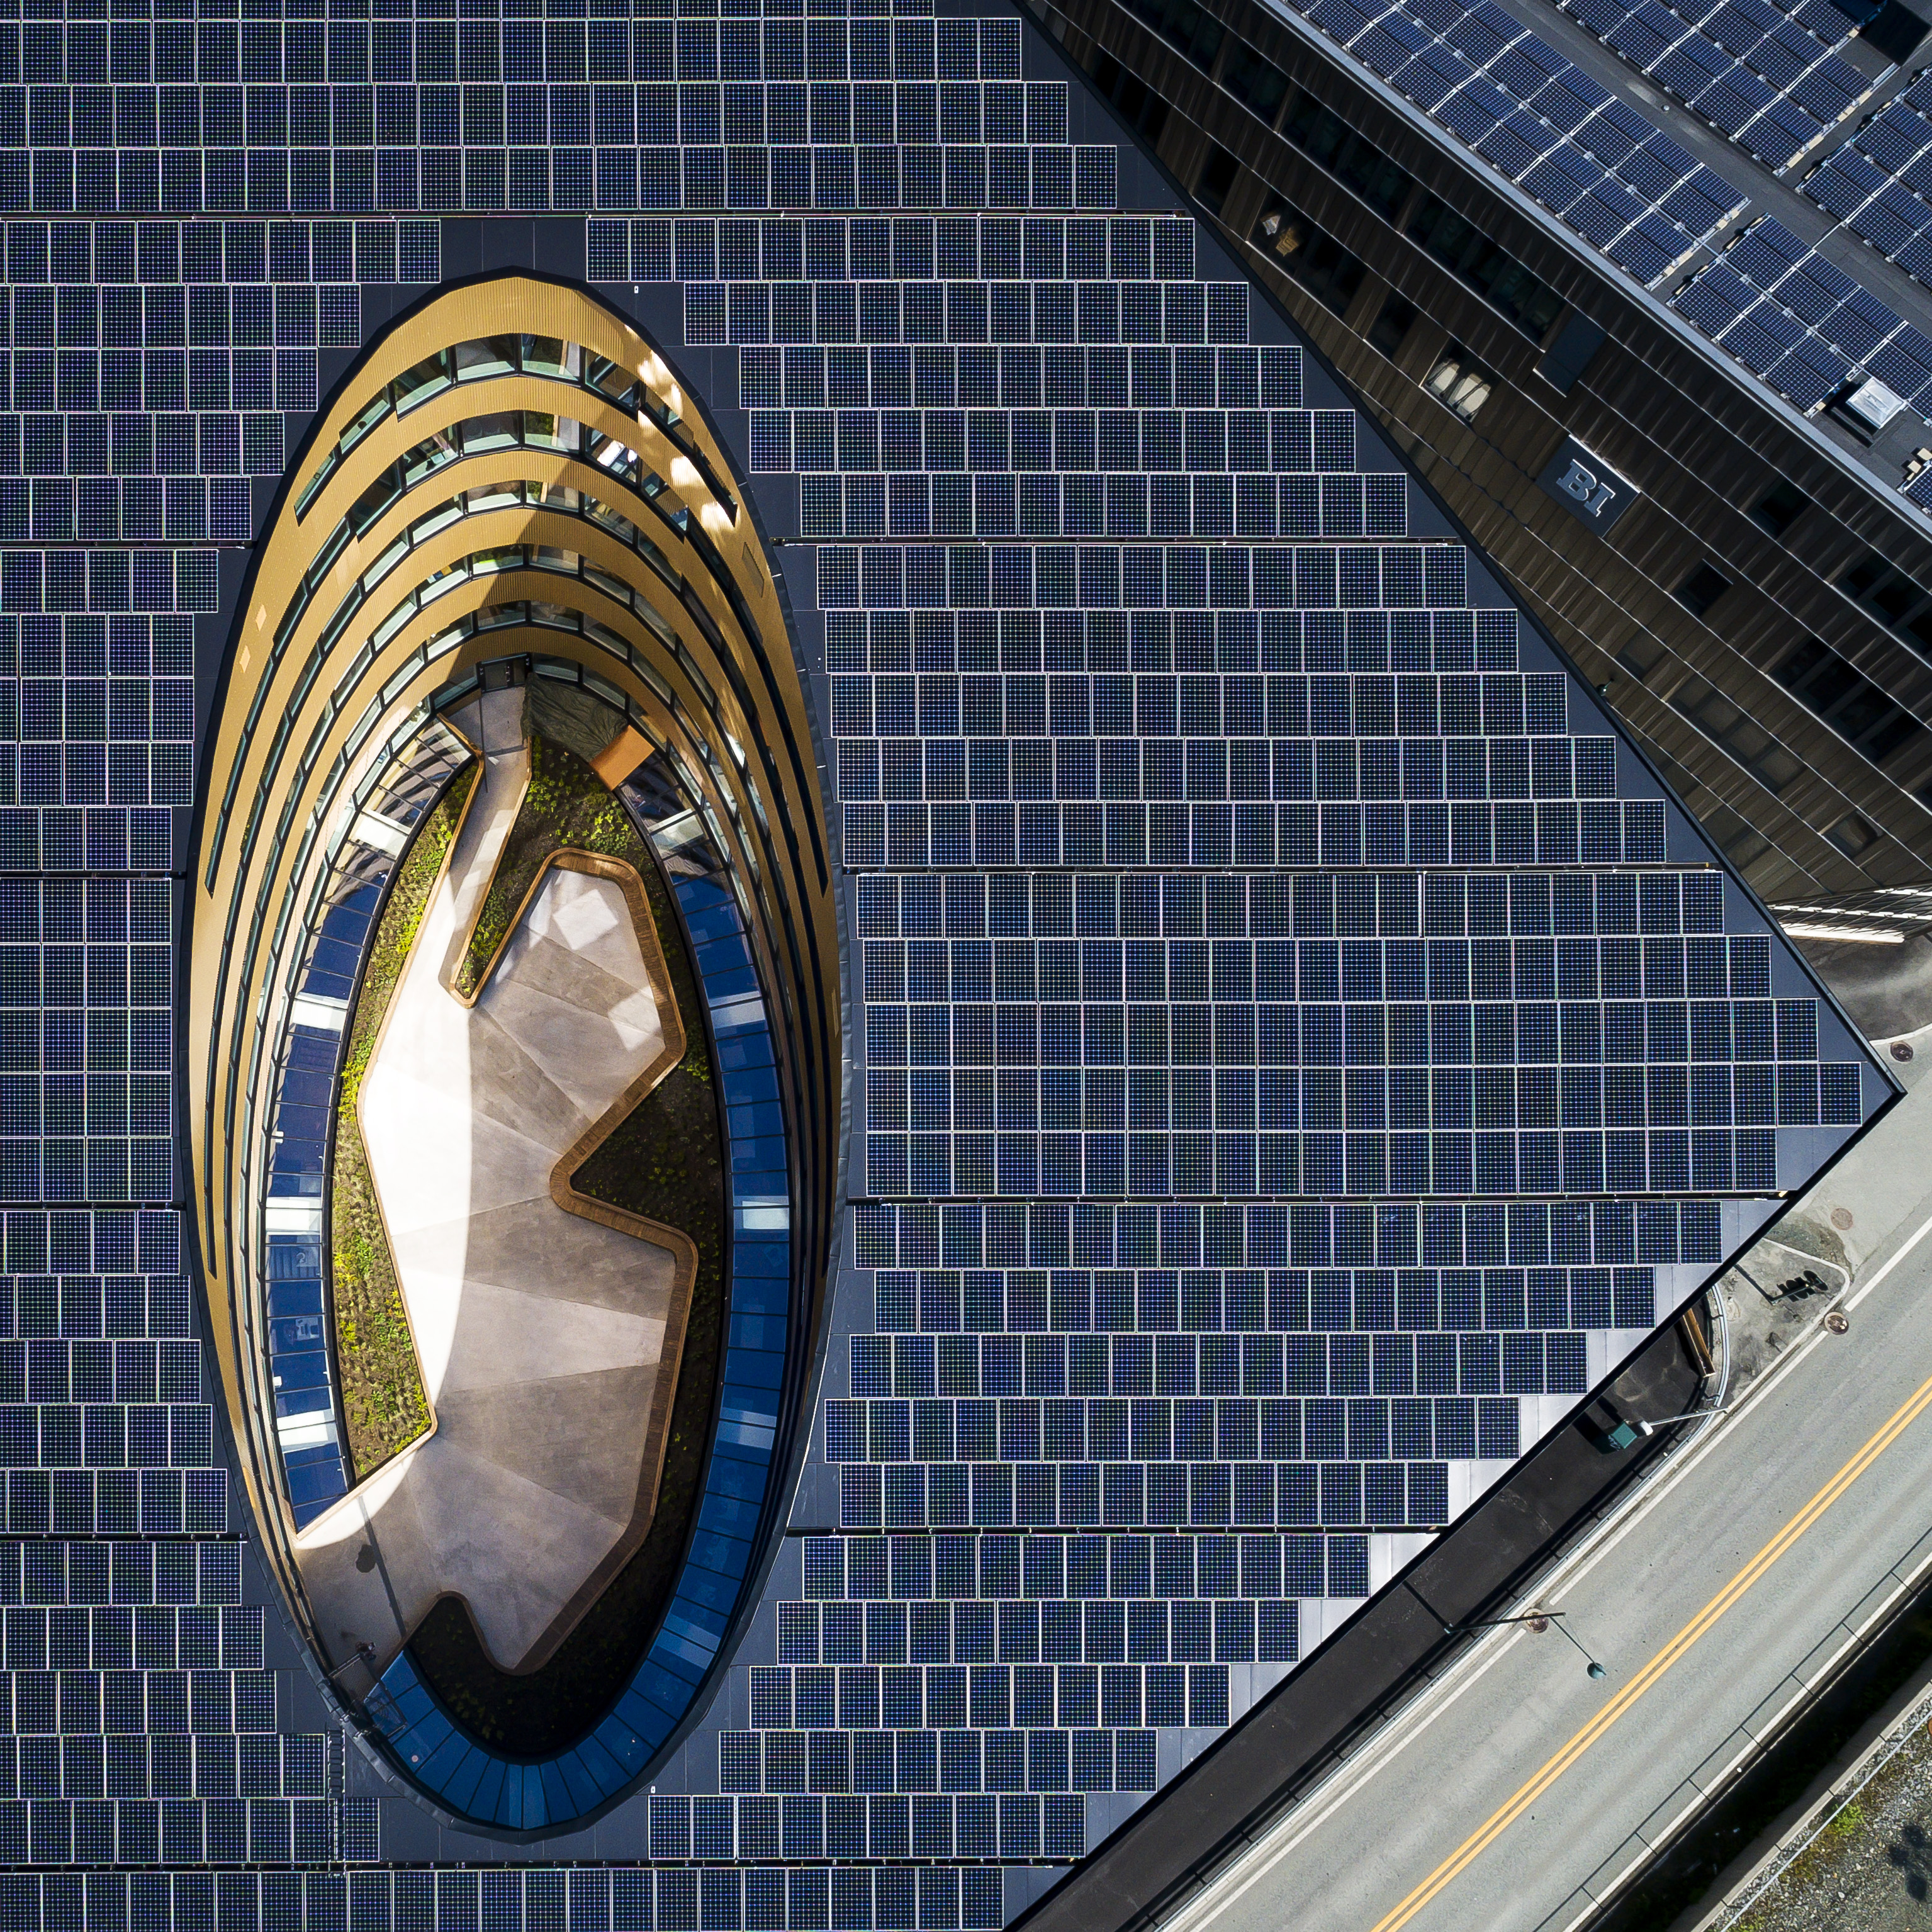 Drone view of solar panels on roof